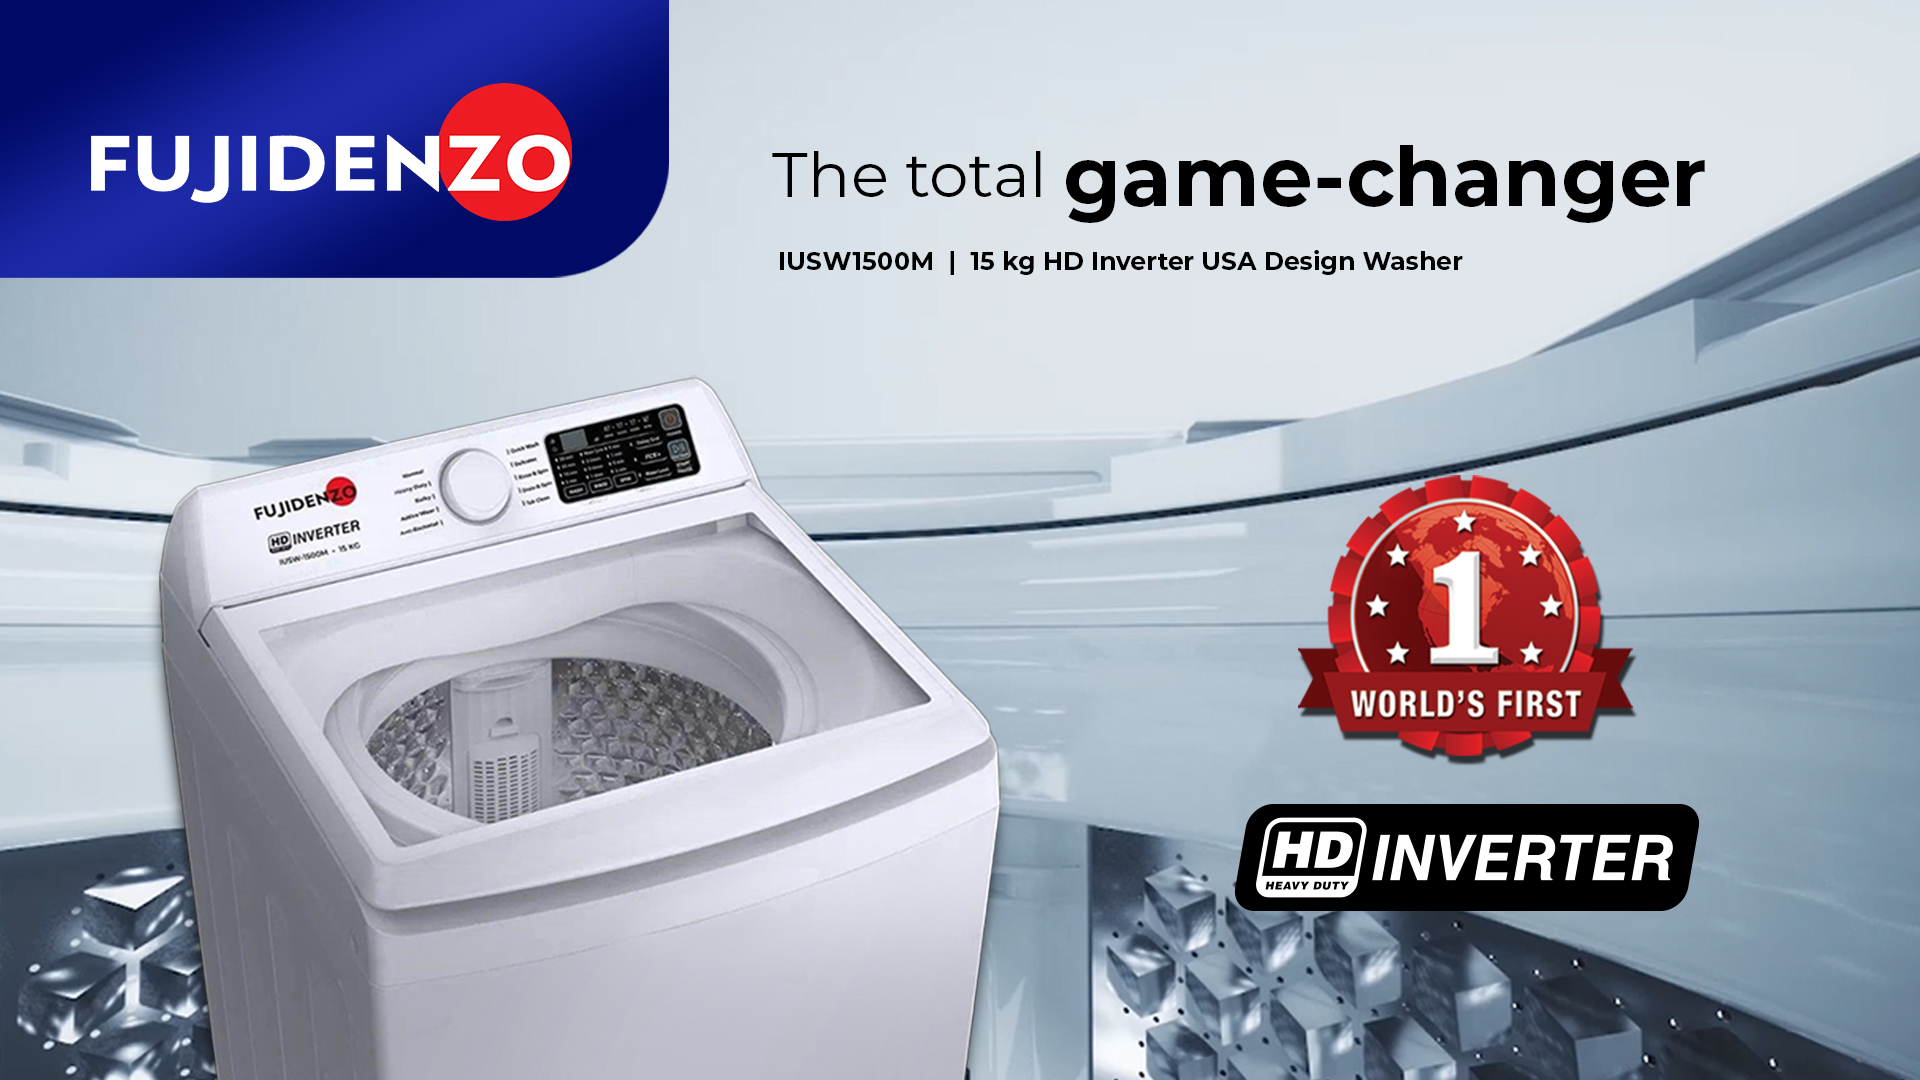 This Fujidenzo HD Inverter USA Design Washer is a total game-changer